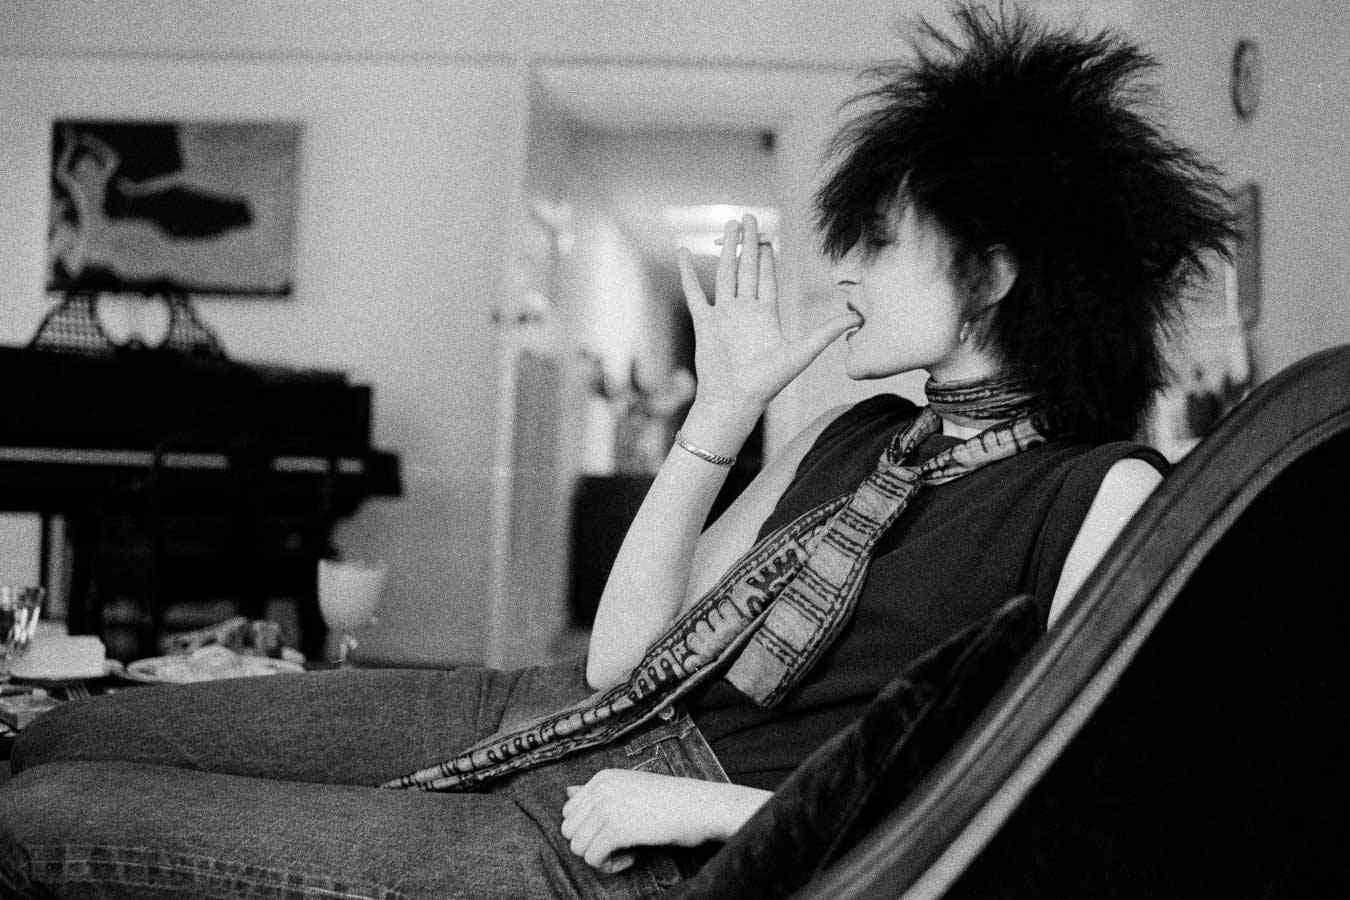 27 maggio nel rock: Siouxsie Sioux, Eagles, God Save The Queen, Sex Pistols, Red Hot Chili Peppers, Gregg Allman